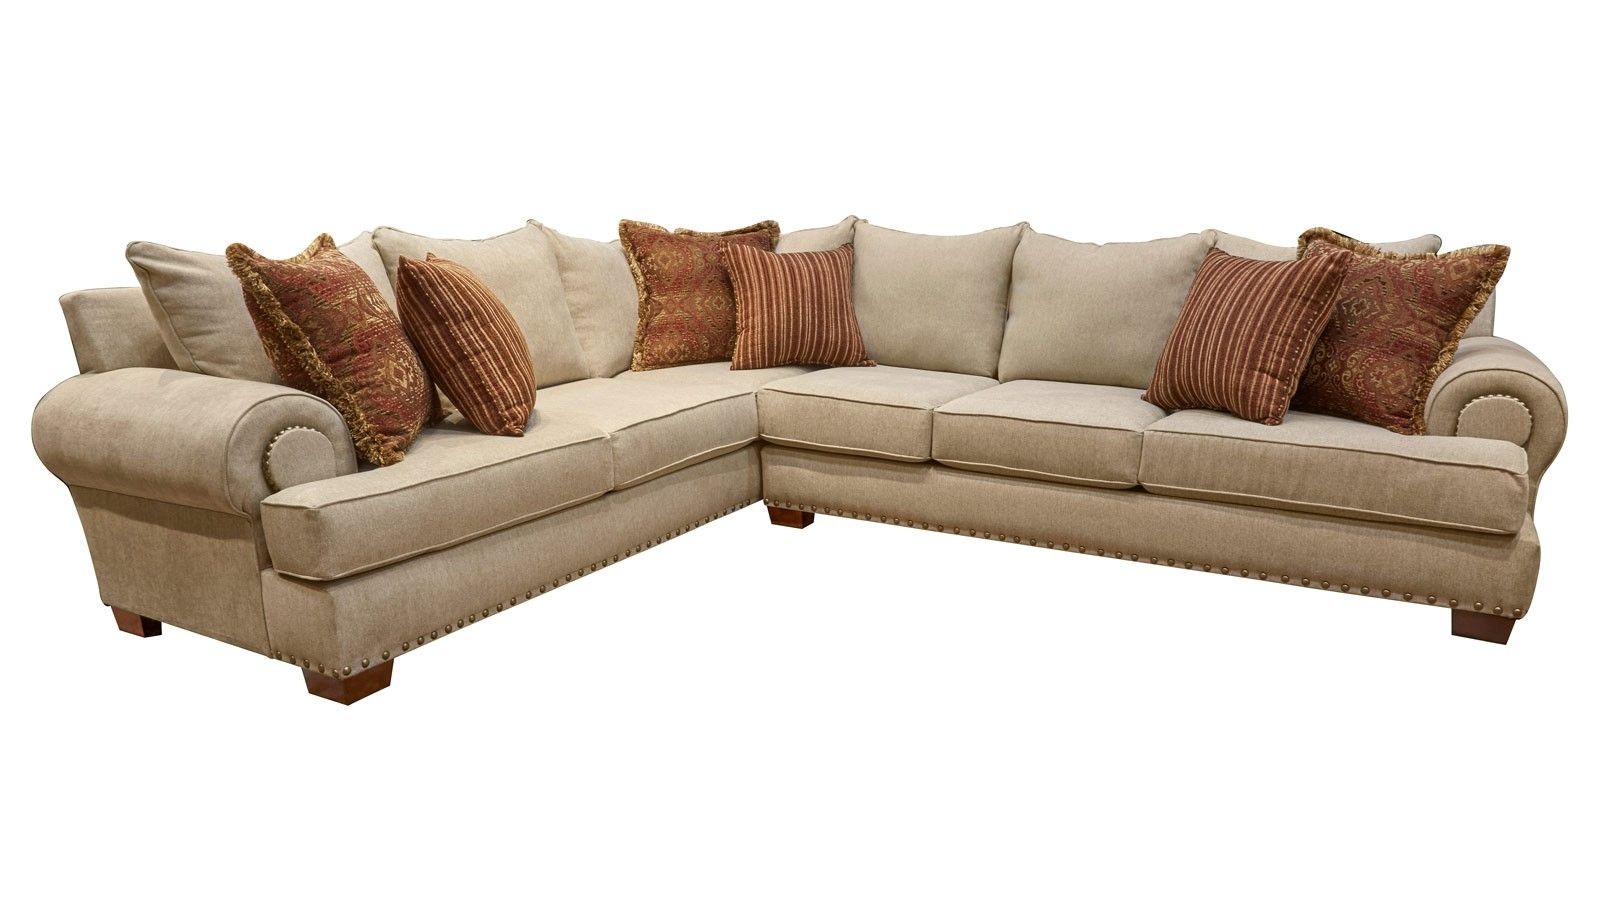 Rice Laf Sectional | Gallery Furniture Intended For Gallery Furniture Sectional Sofas (Photo 4 of 10)